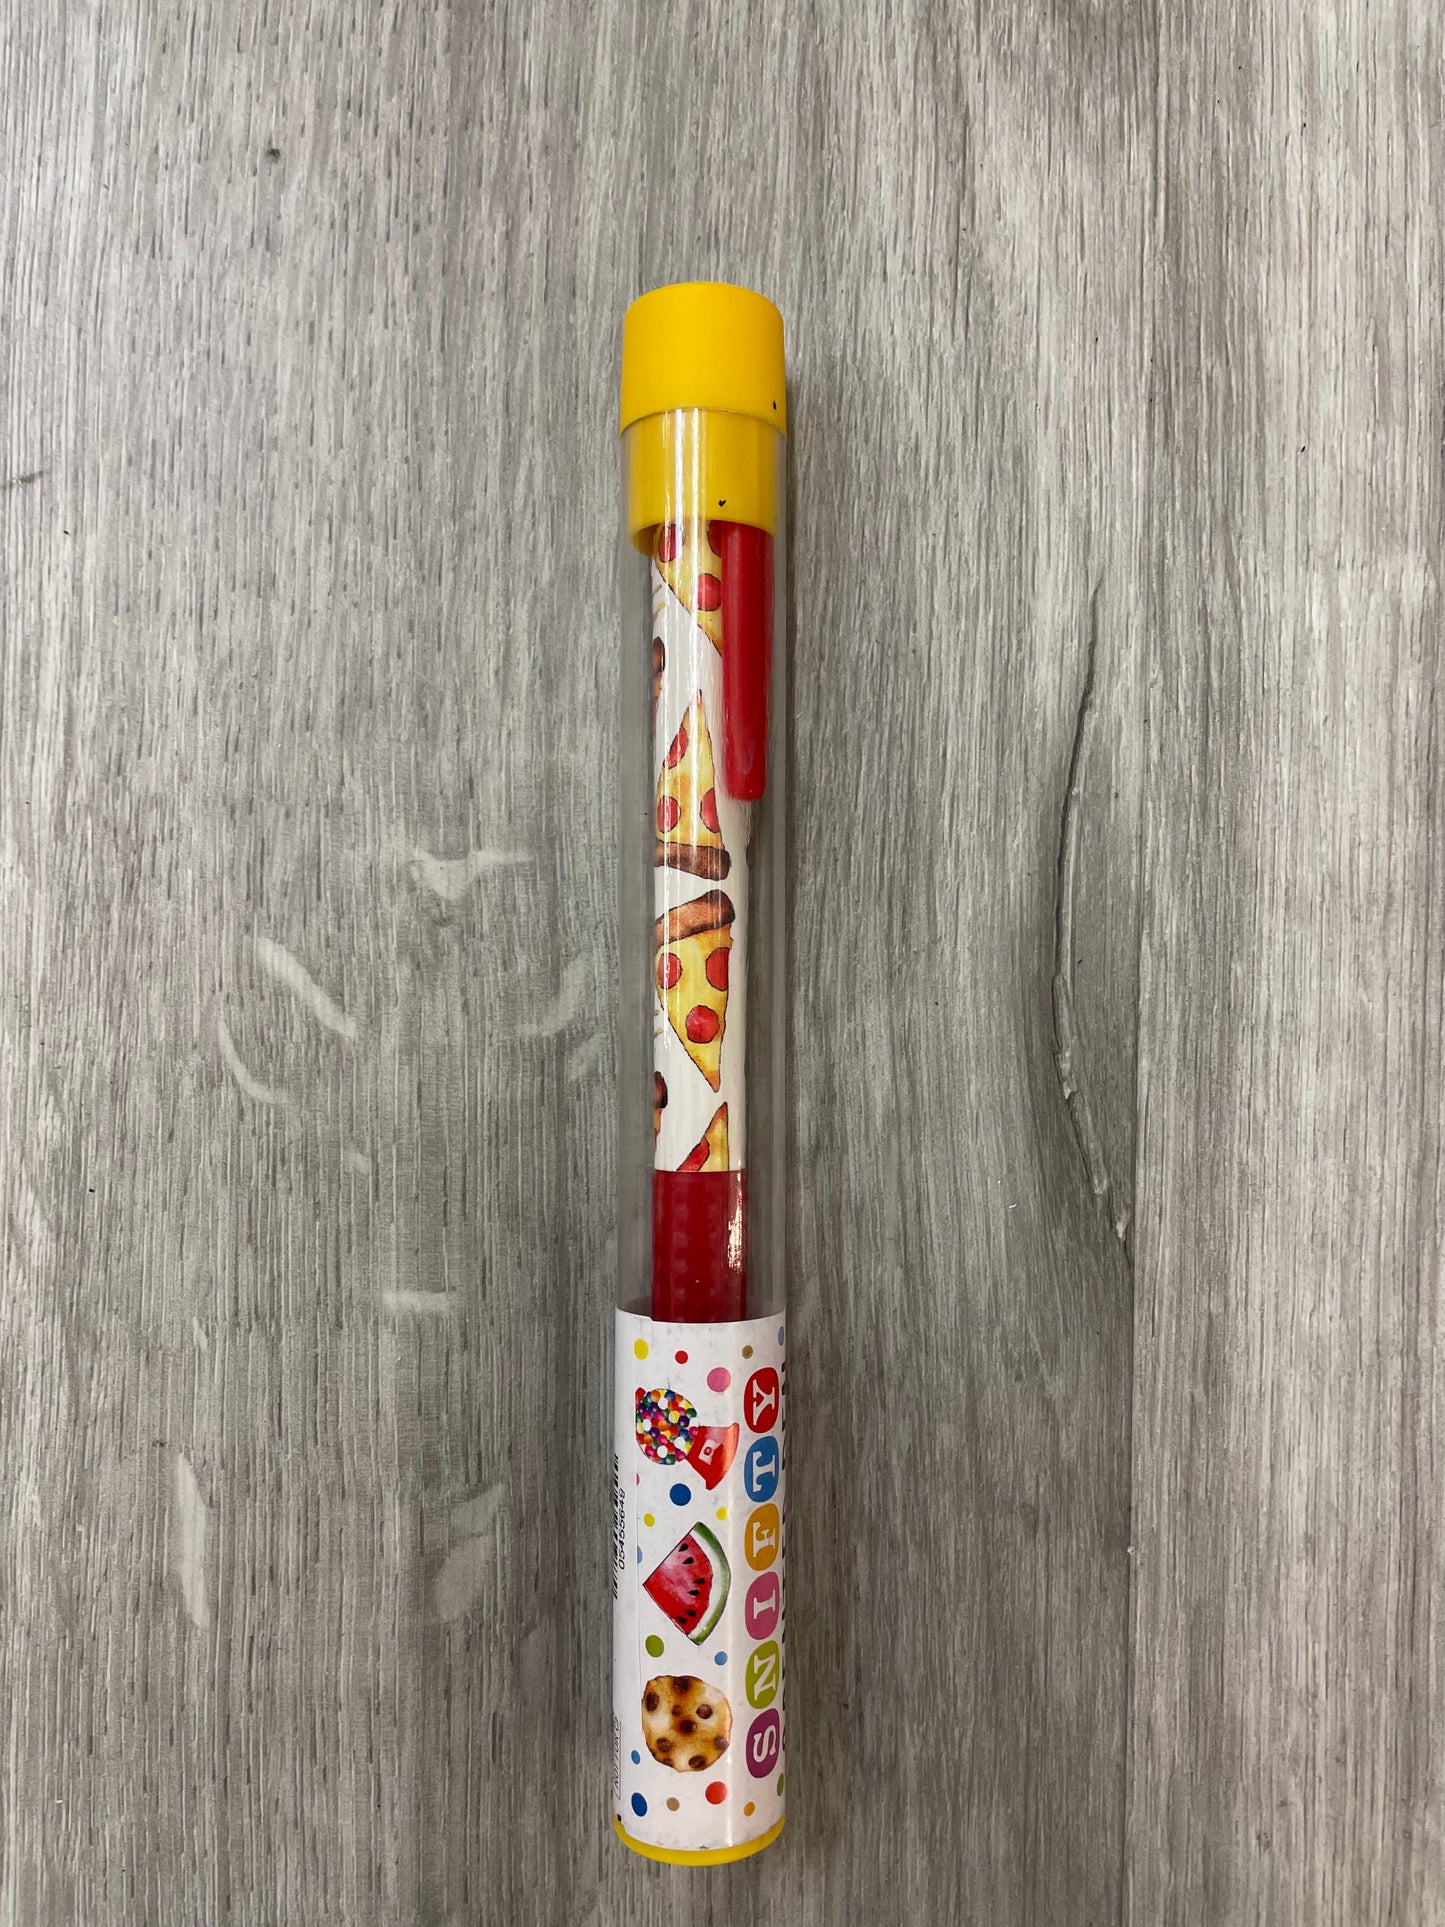 Snifty Pen In Tube Scented Treats